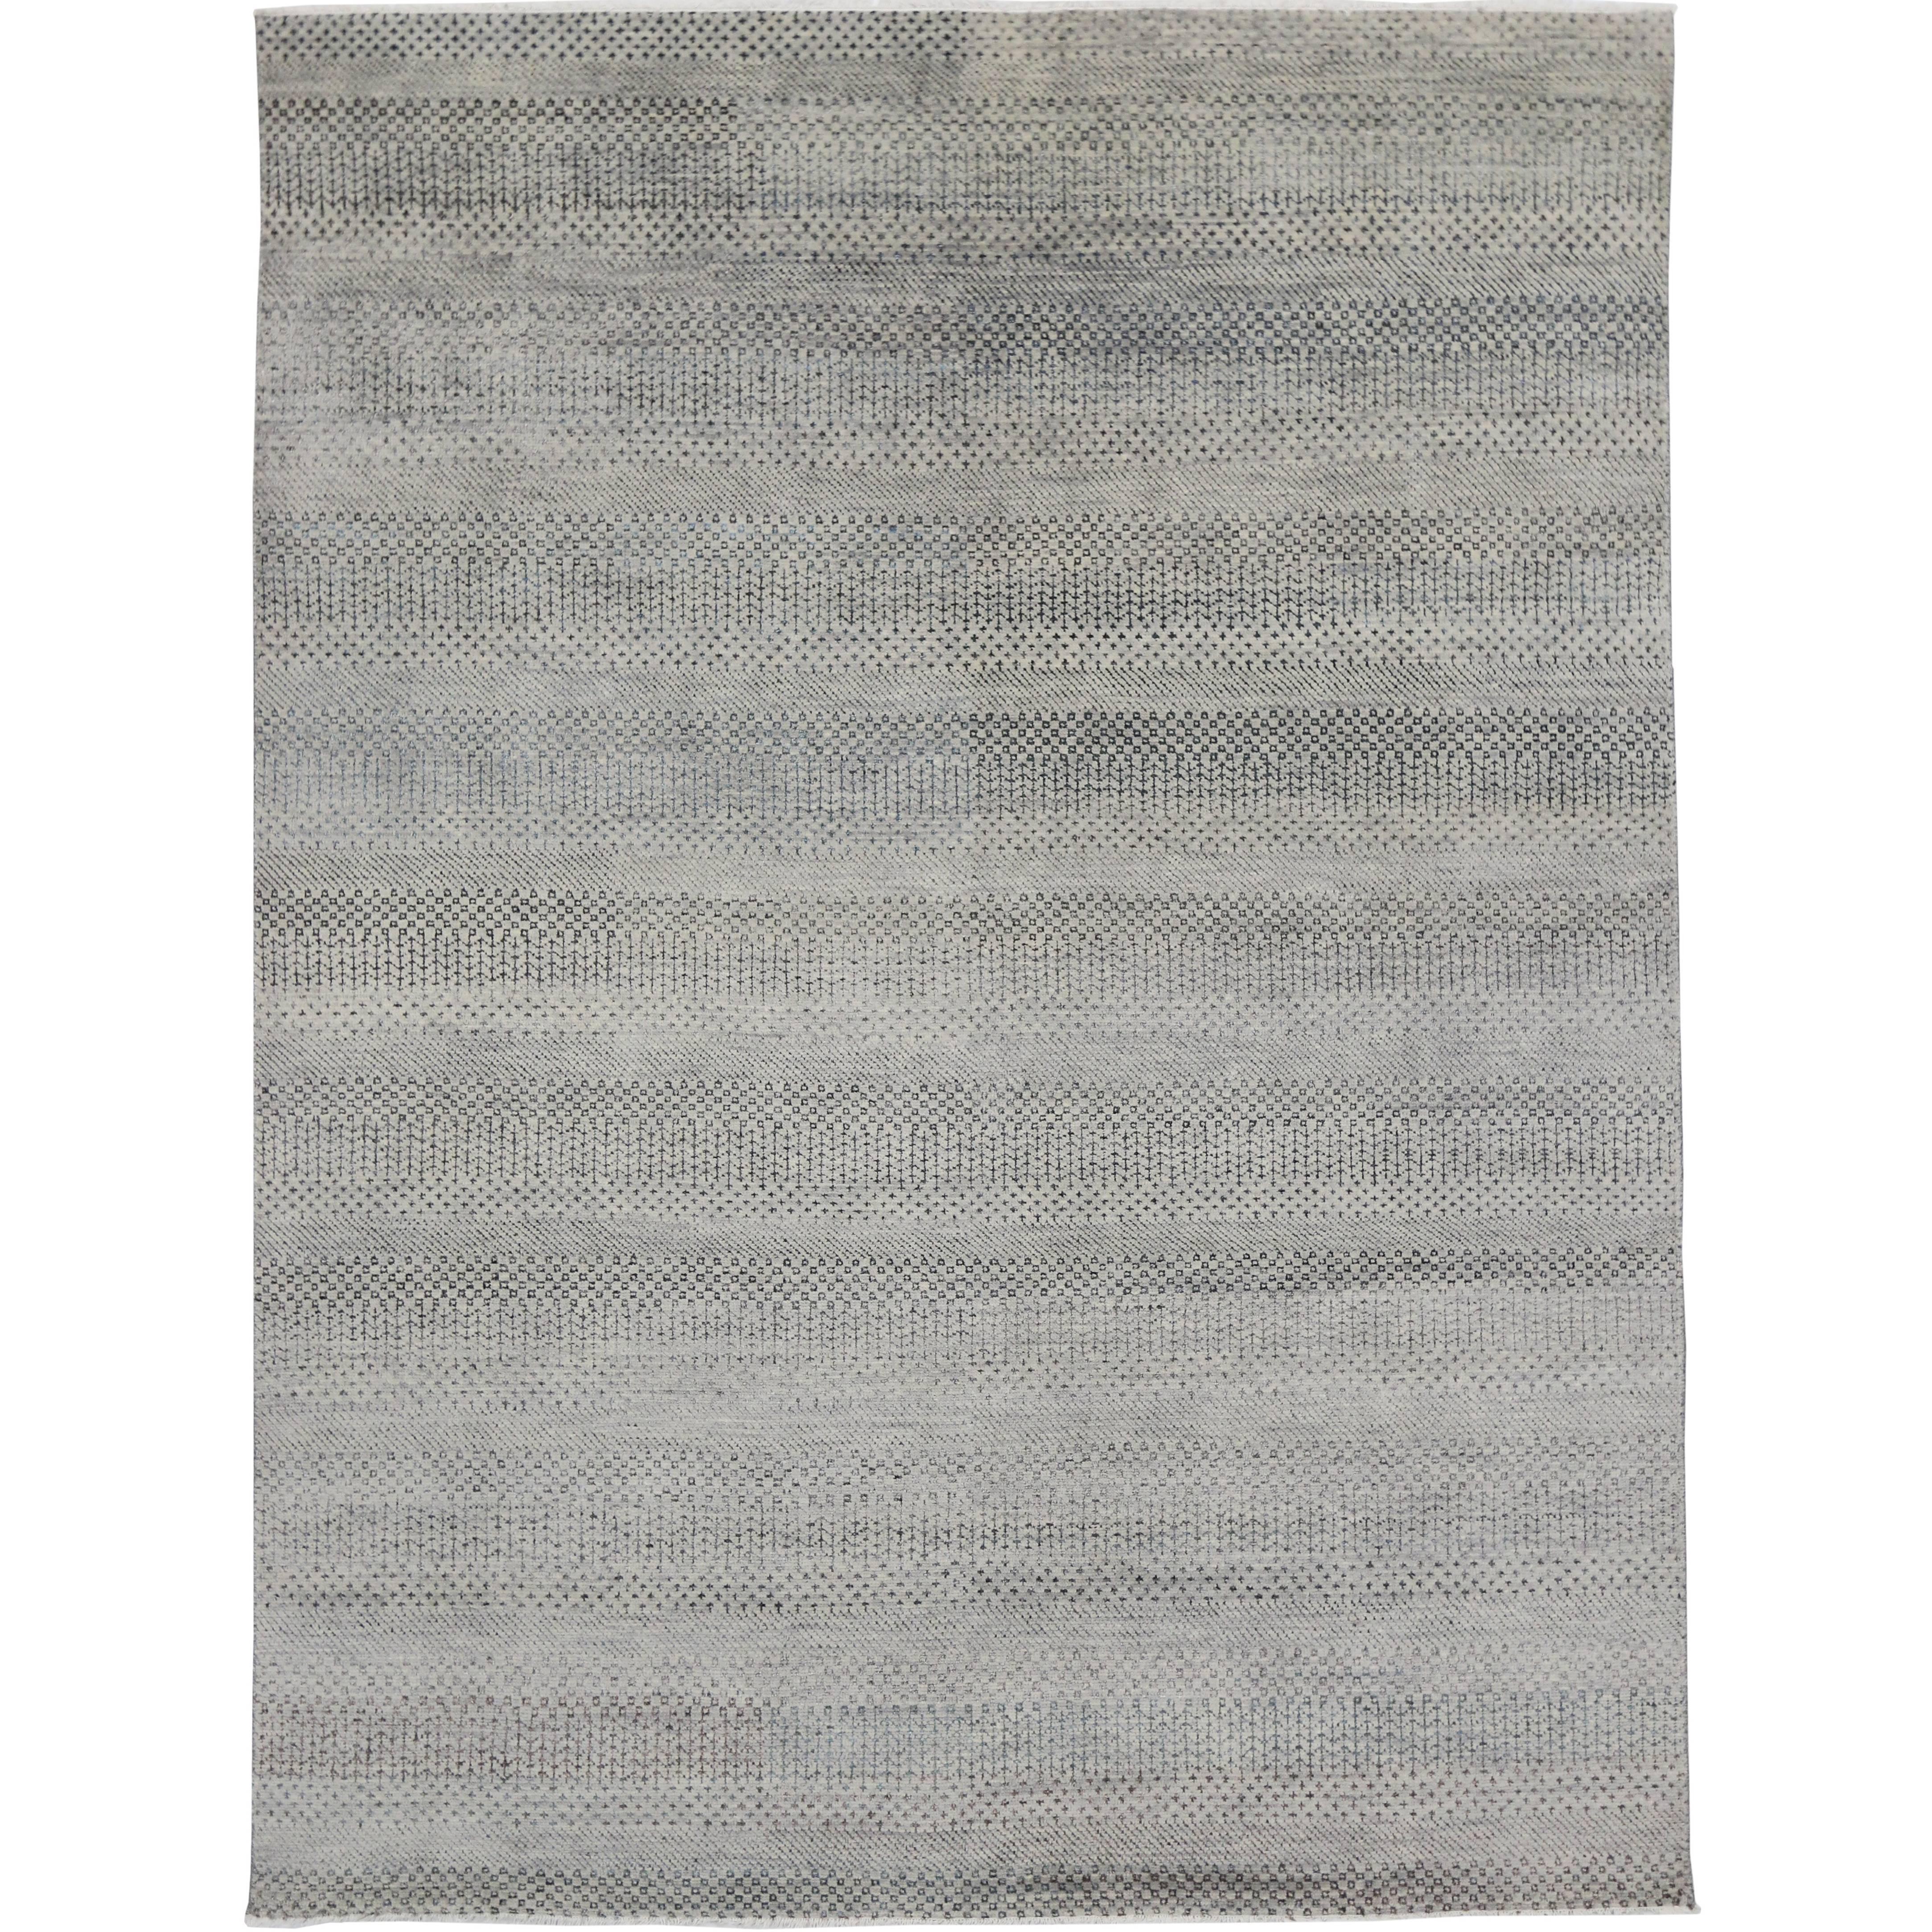 New Transitional Gray Rug with Minimalist Style, Contemporary Bauhaus Design